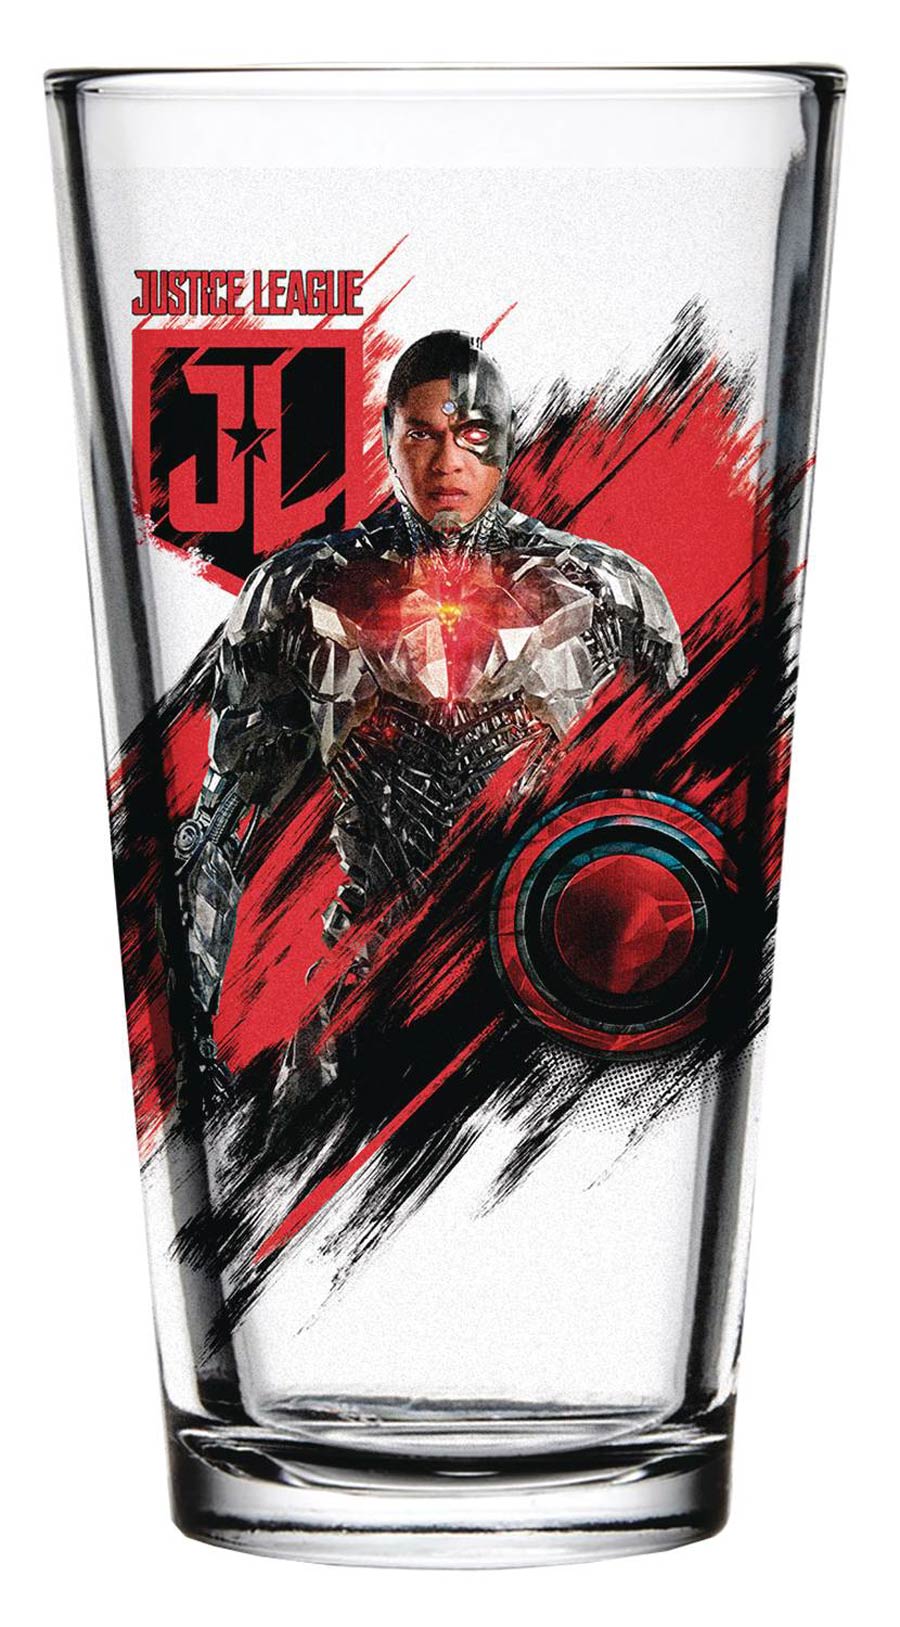 Justice League Movie Pint Glass - Cyborg